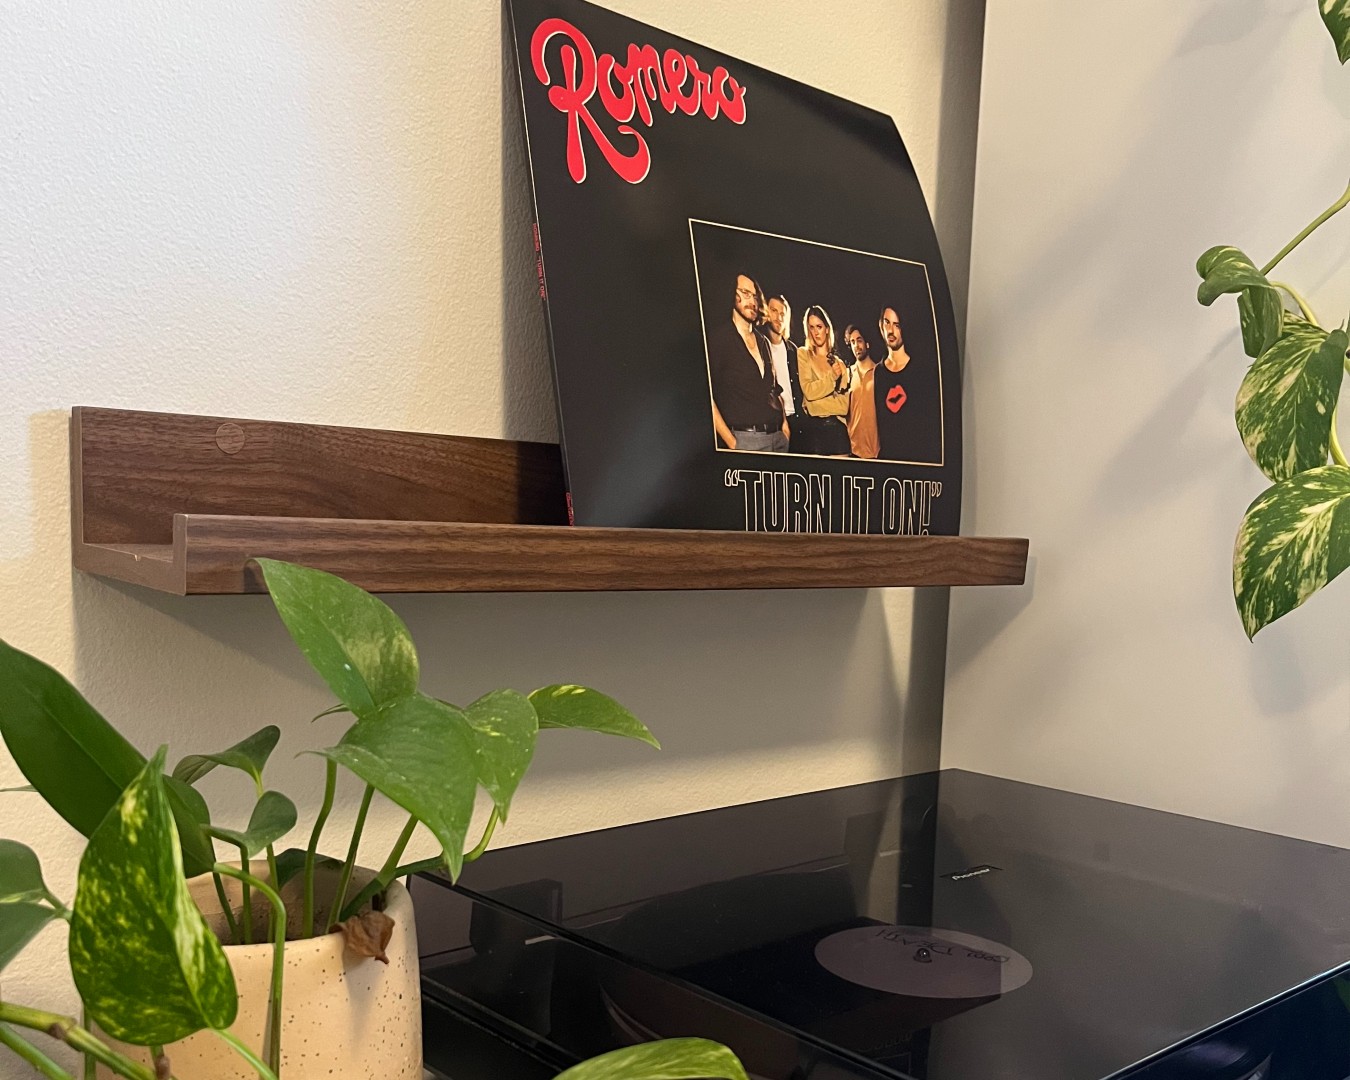 Record on IKEA picture ledge in lounge room.